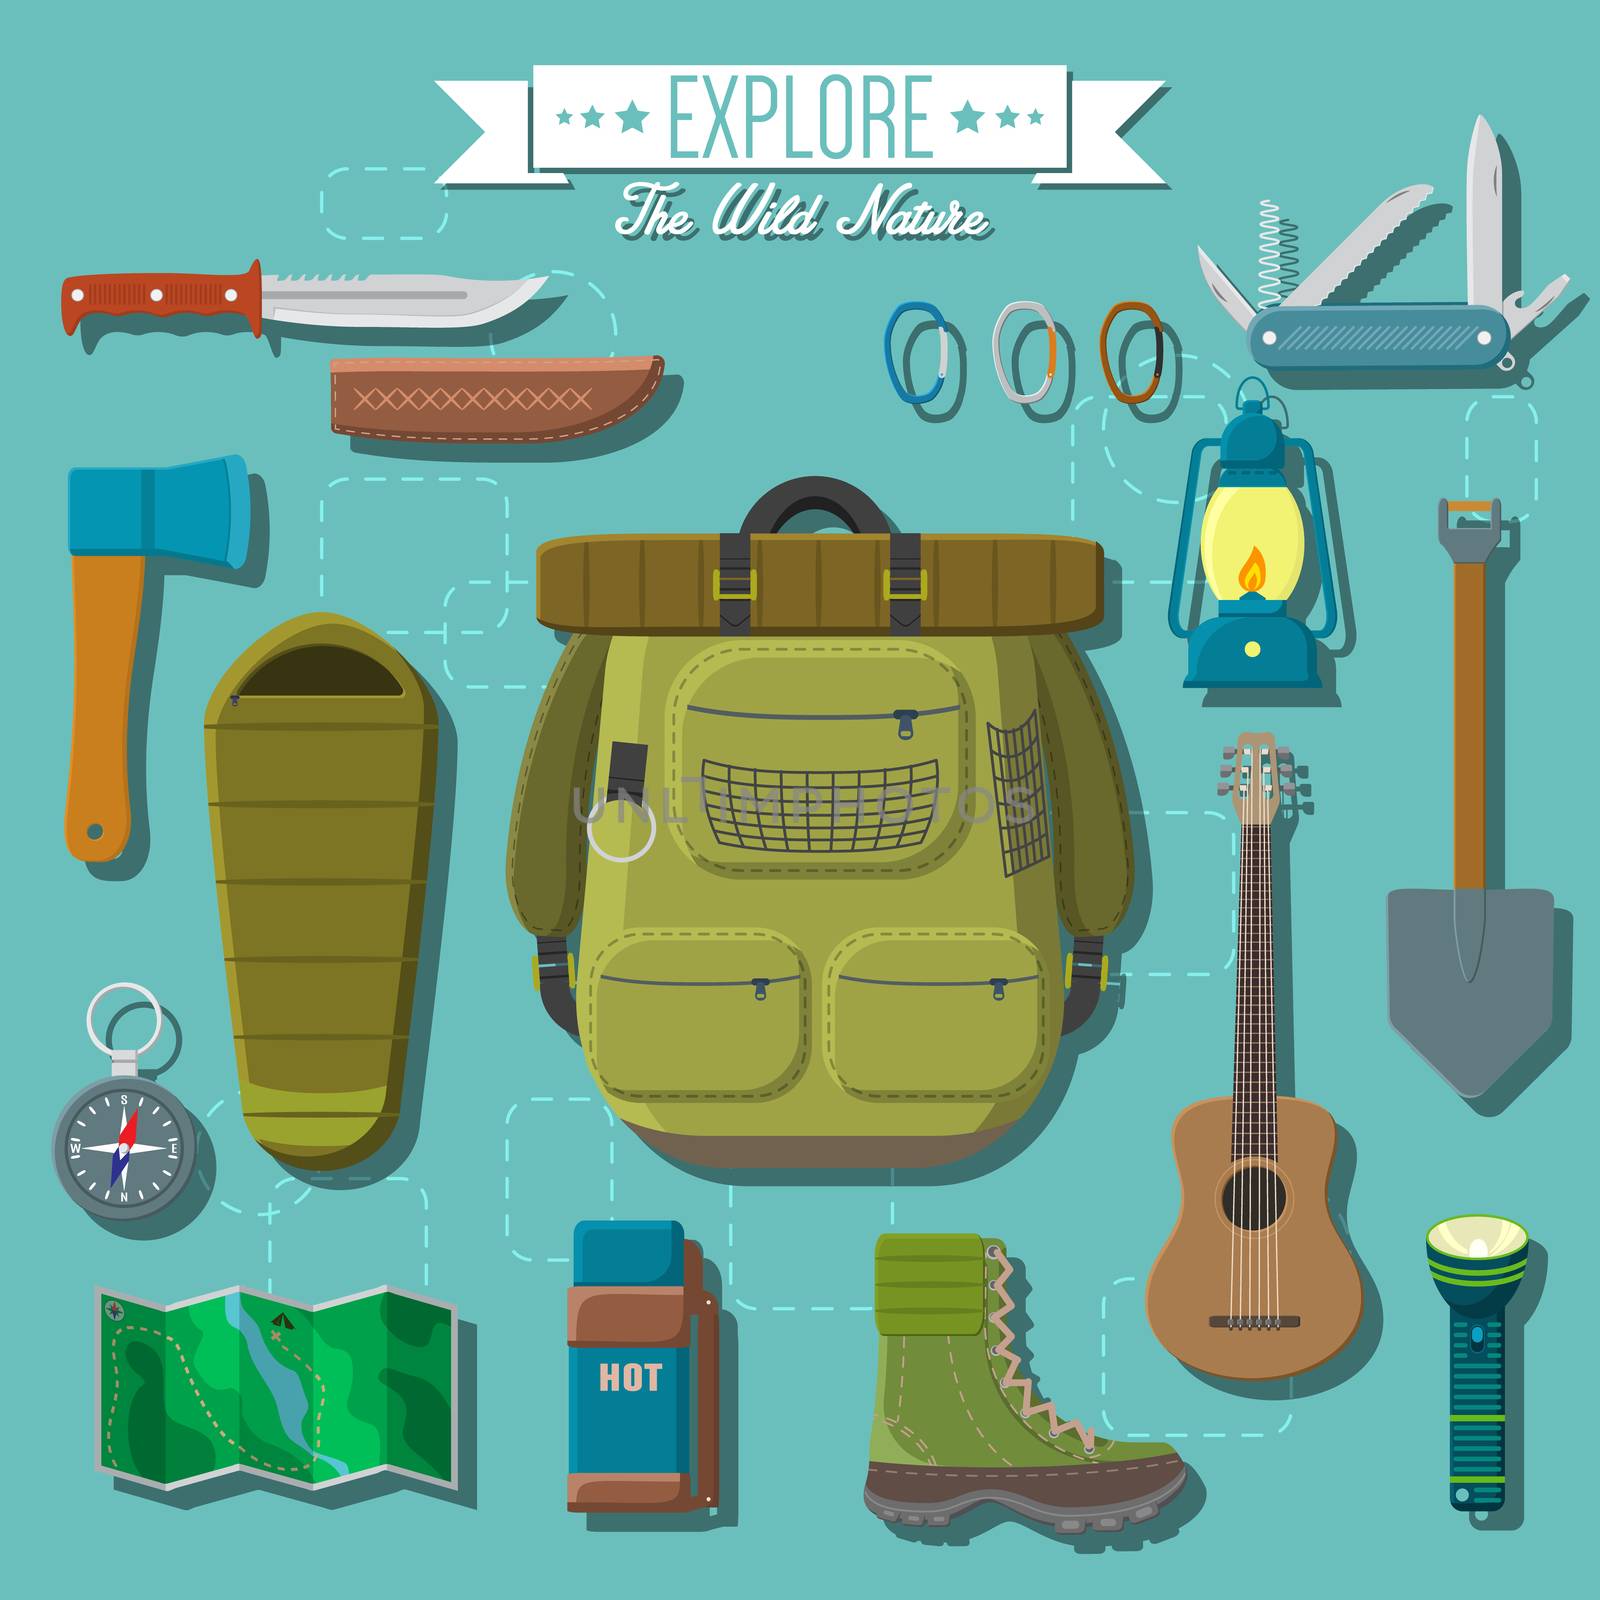 Flat design modern vector illustration of camping and hiking equipment set. Travel and vacation items, knife and axe, backpack and hiking boots, lantern and guitar, sleeping bag, map and compass by Lemon_workshop